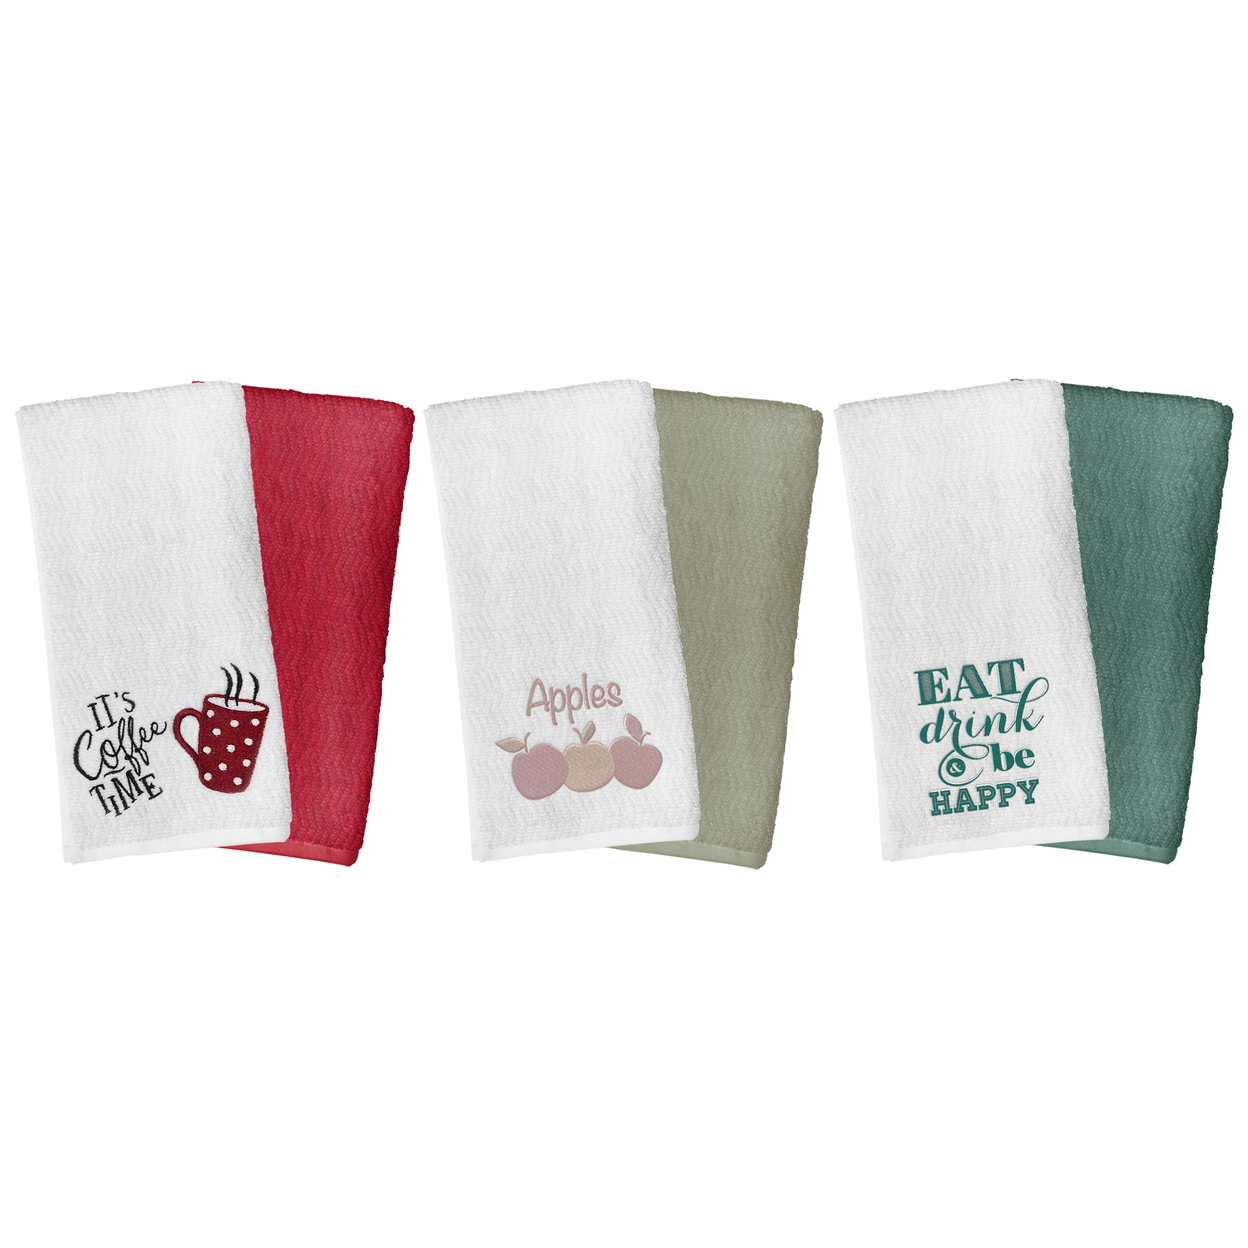 6-Pack: Ultra-Soft Super Absorbent Decorative 100% Cotton Embroidered Kitchen Dish Linen Towels